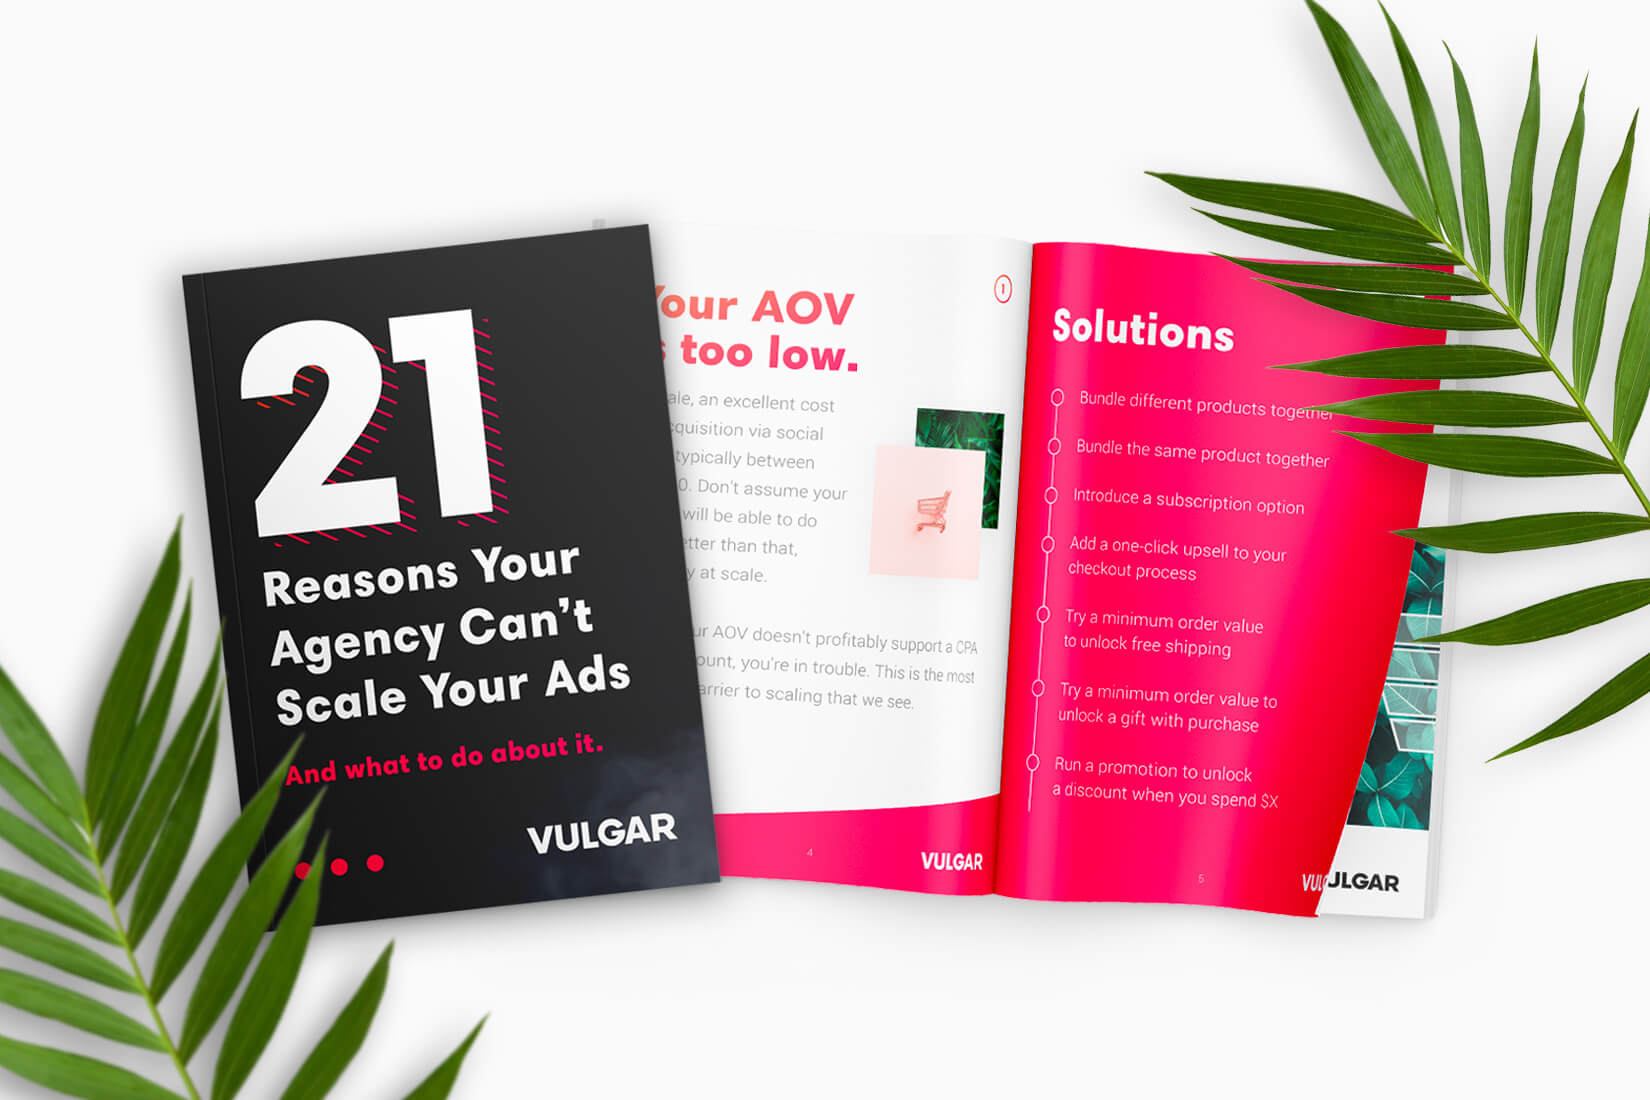 Free eBook: 21 Reasons Your Agency Can’t Scale Your Ads